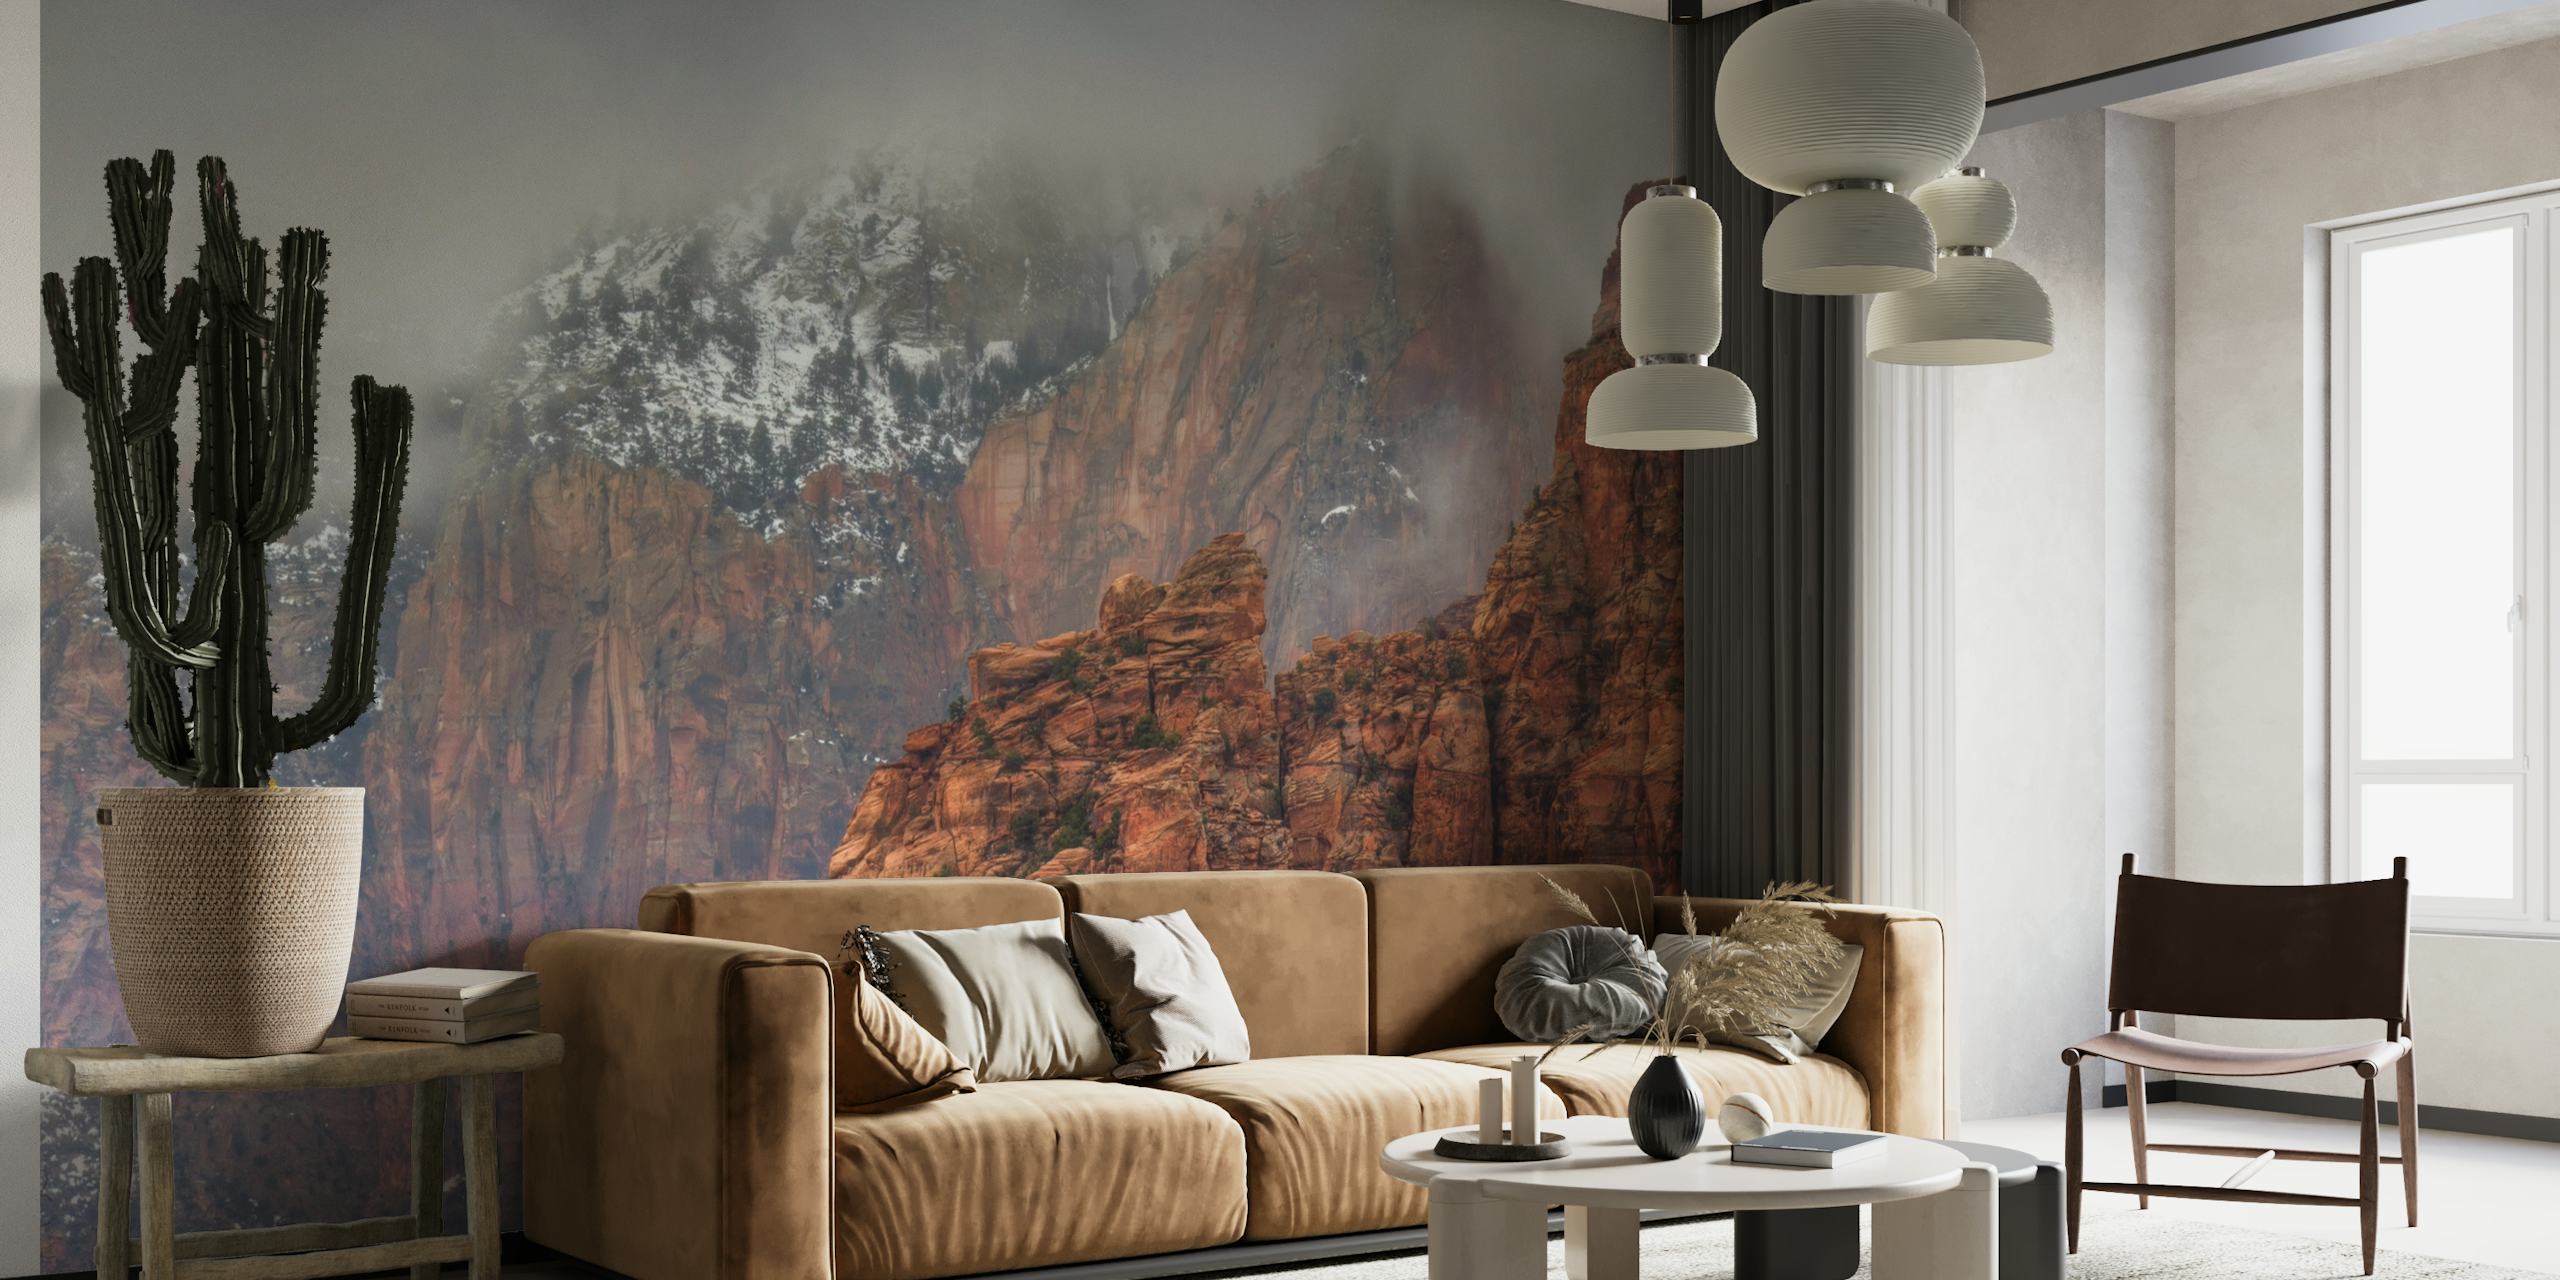 Misty mountain wall mural with rocky textures and warm tones